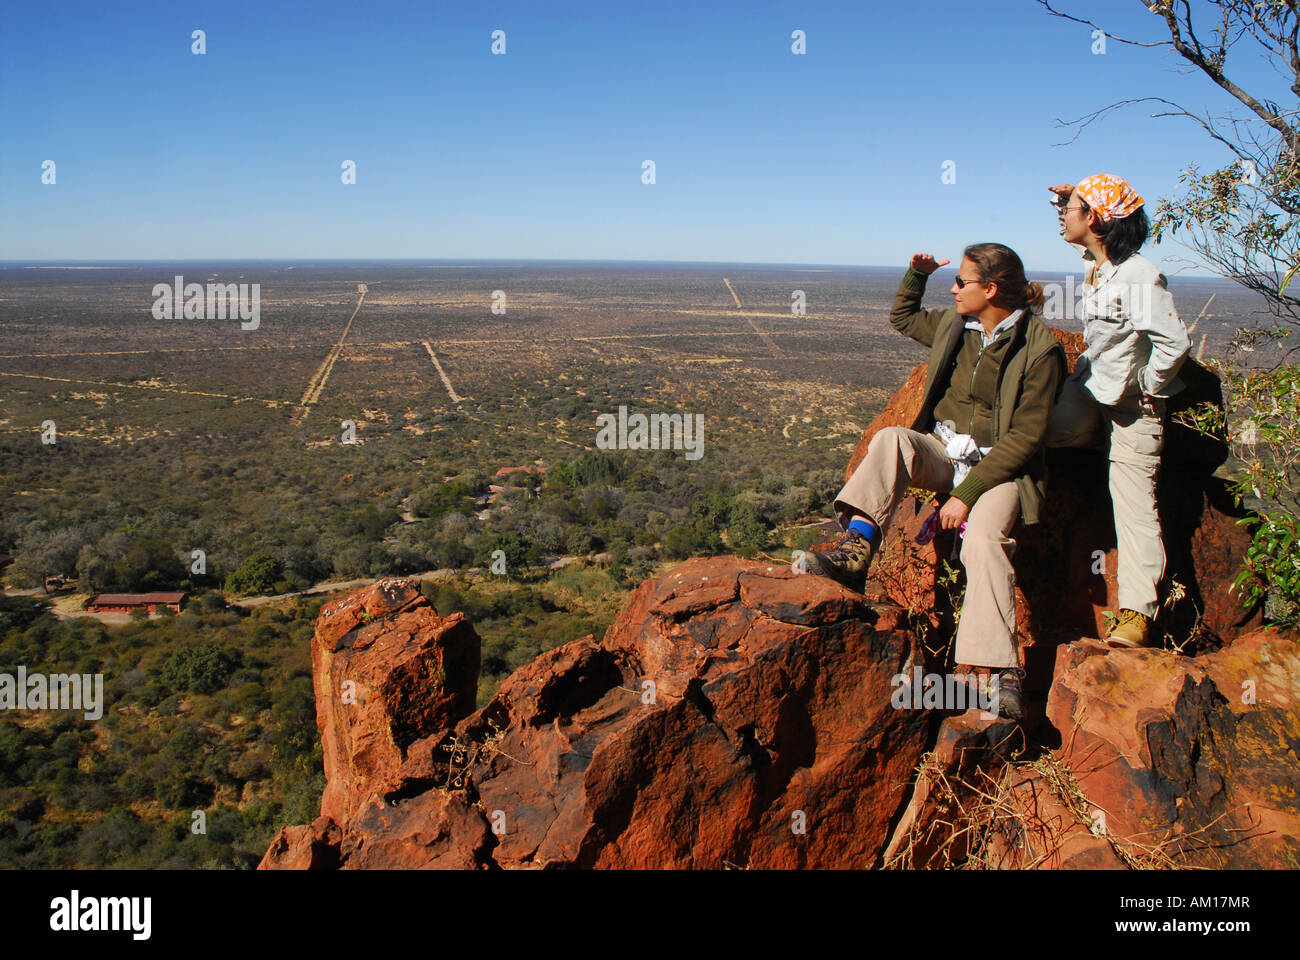 View over the bushland, Waterberg, Namibia Stock Photo